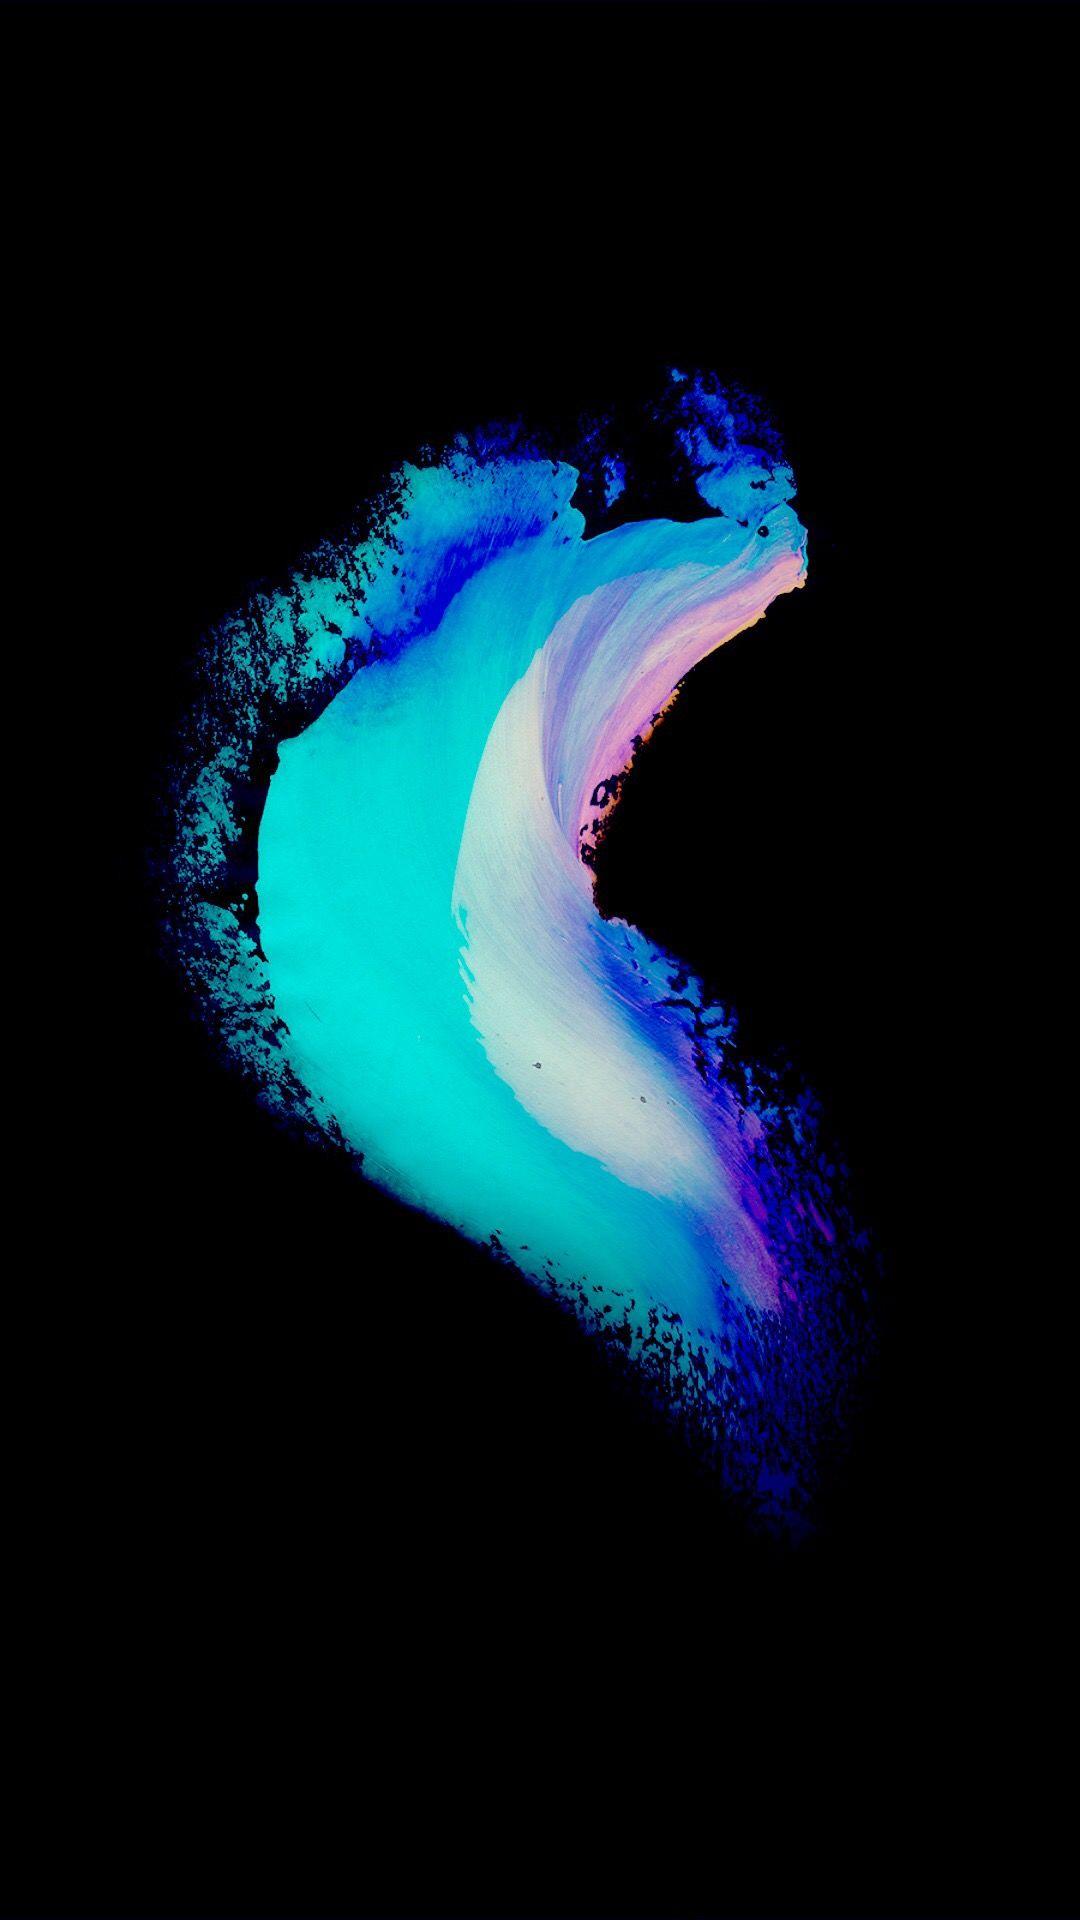 1080p Amoled Android Wallpapers - Wallpaper Cave